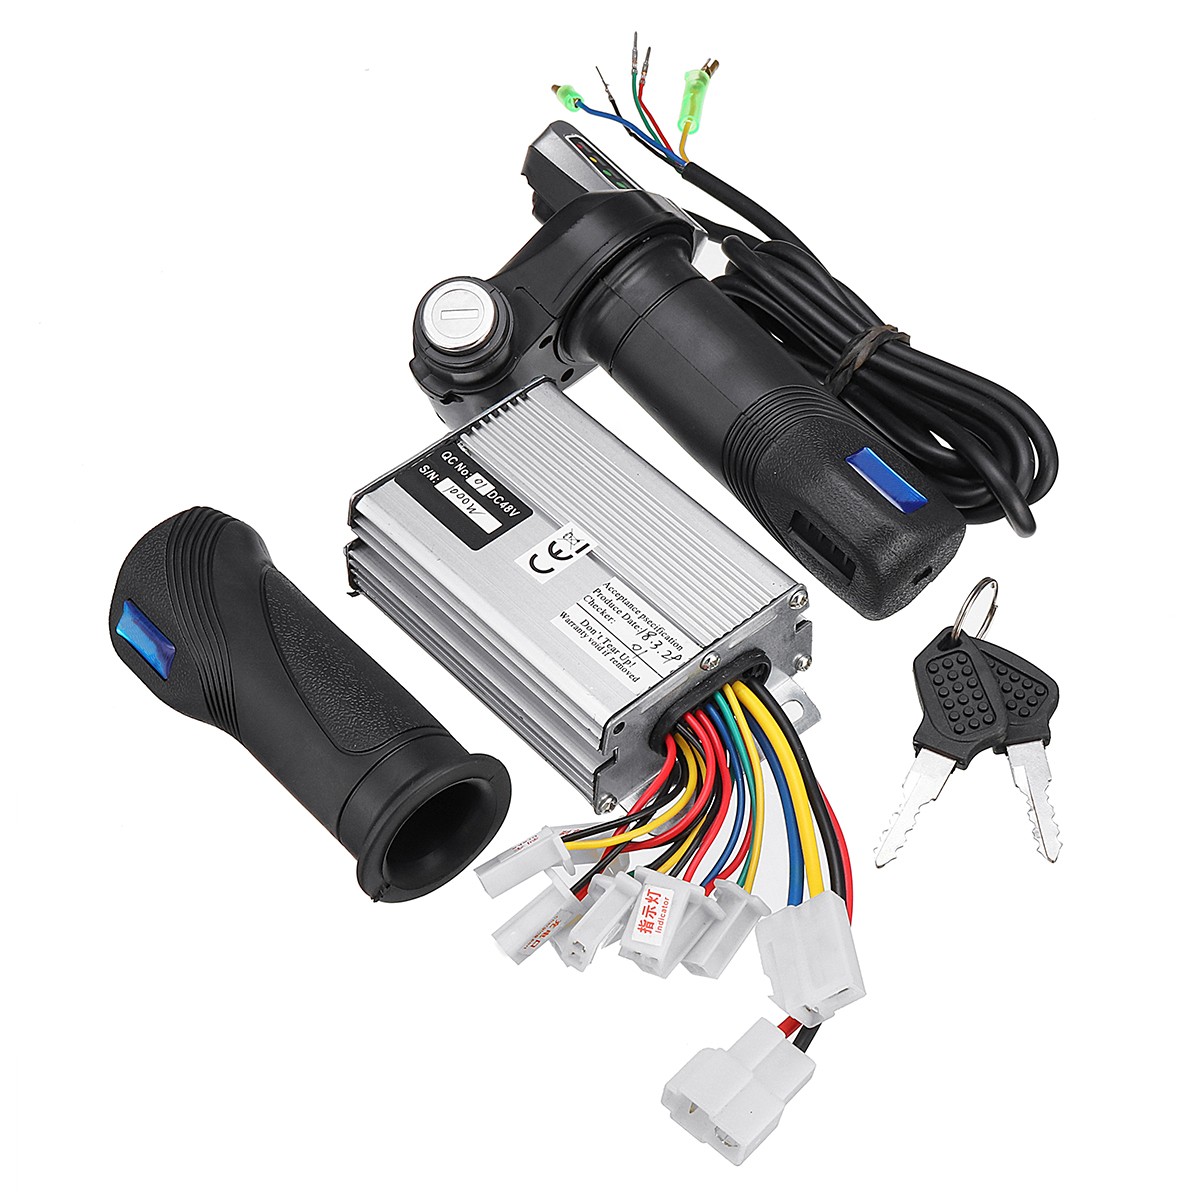 1000W 48V Electric Motor Brushed Controller + Throttle Grip Fits Standard 7/8 Inches(22Mm) Handle Bars - Auto GoShop